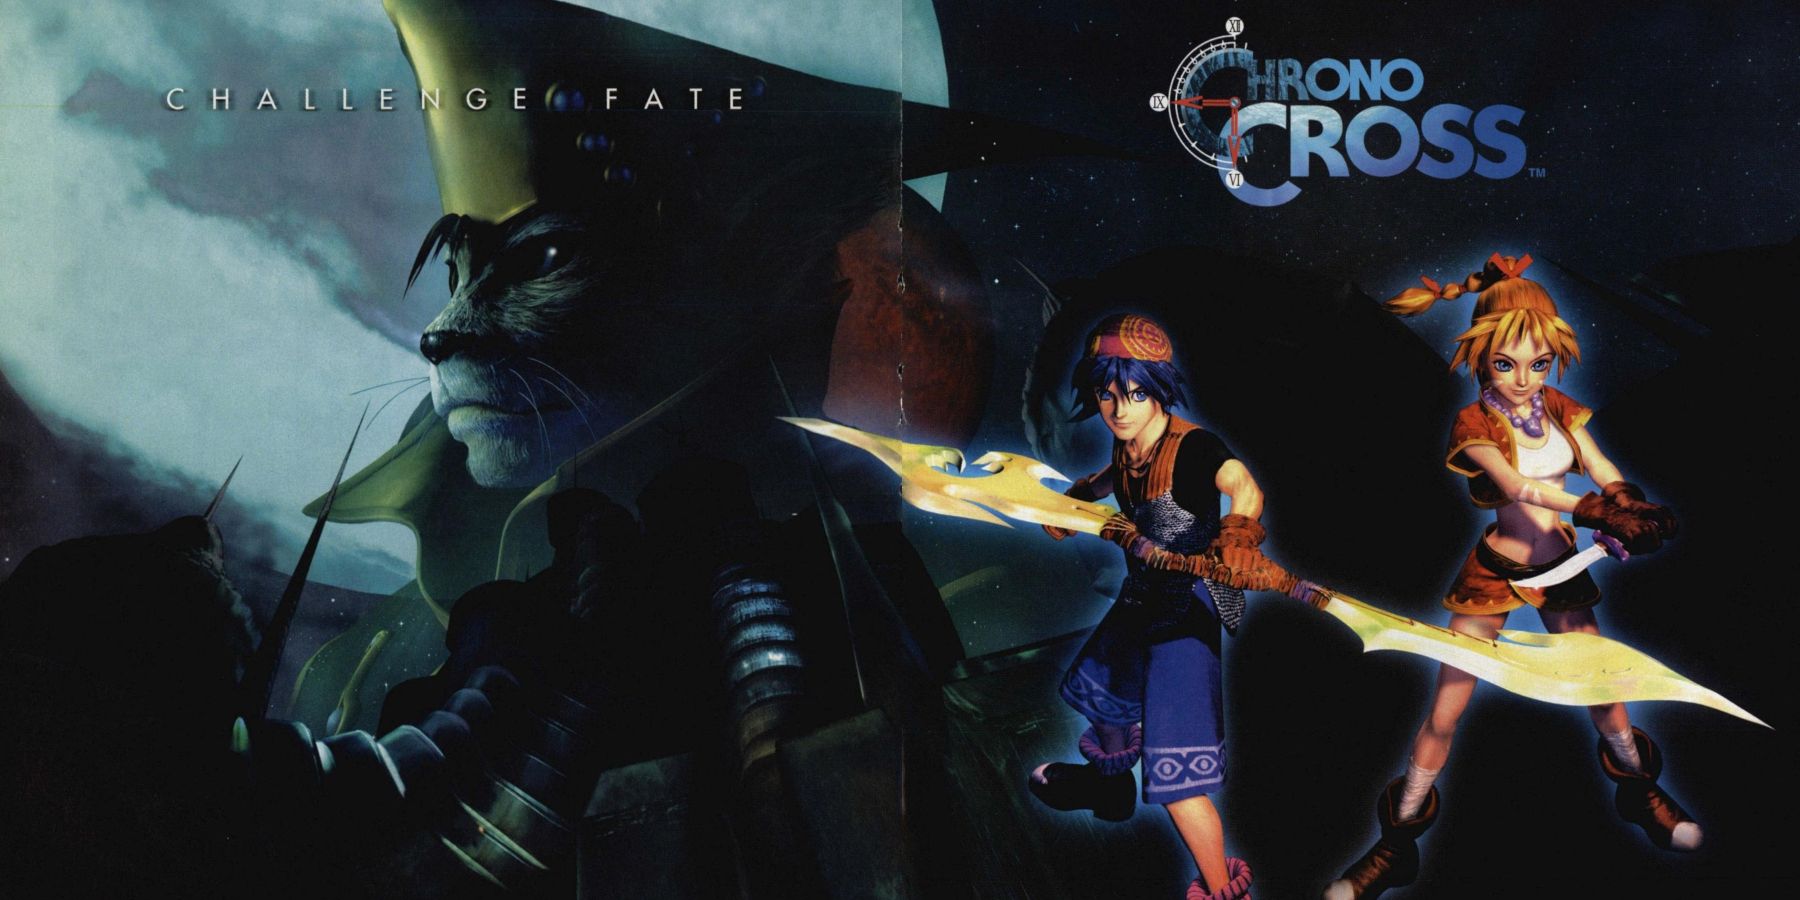 Chrono Cross is a classic that deserves its remaster – but fans of